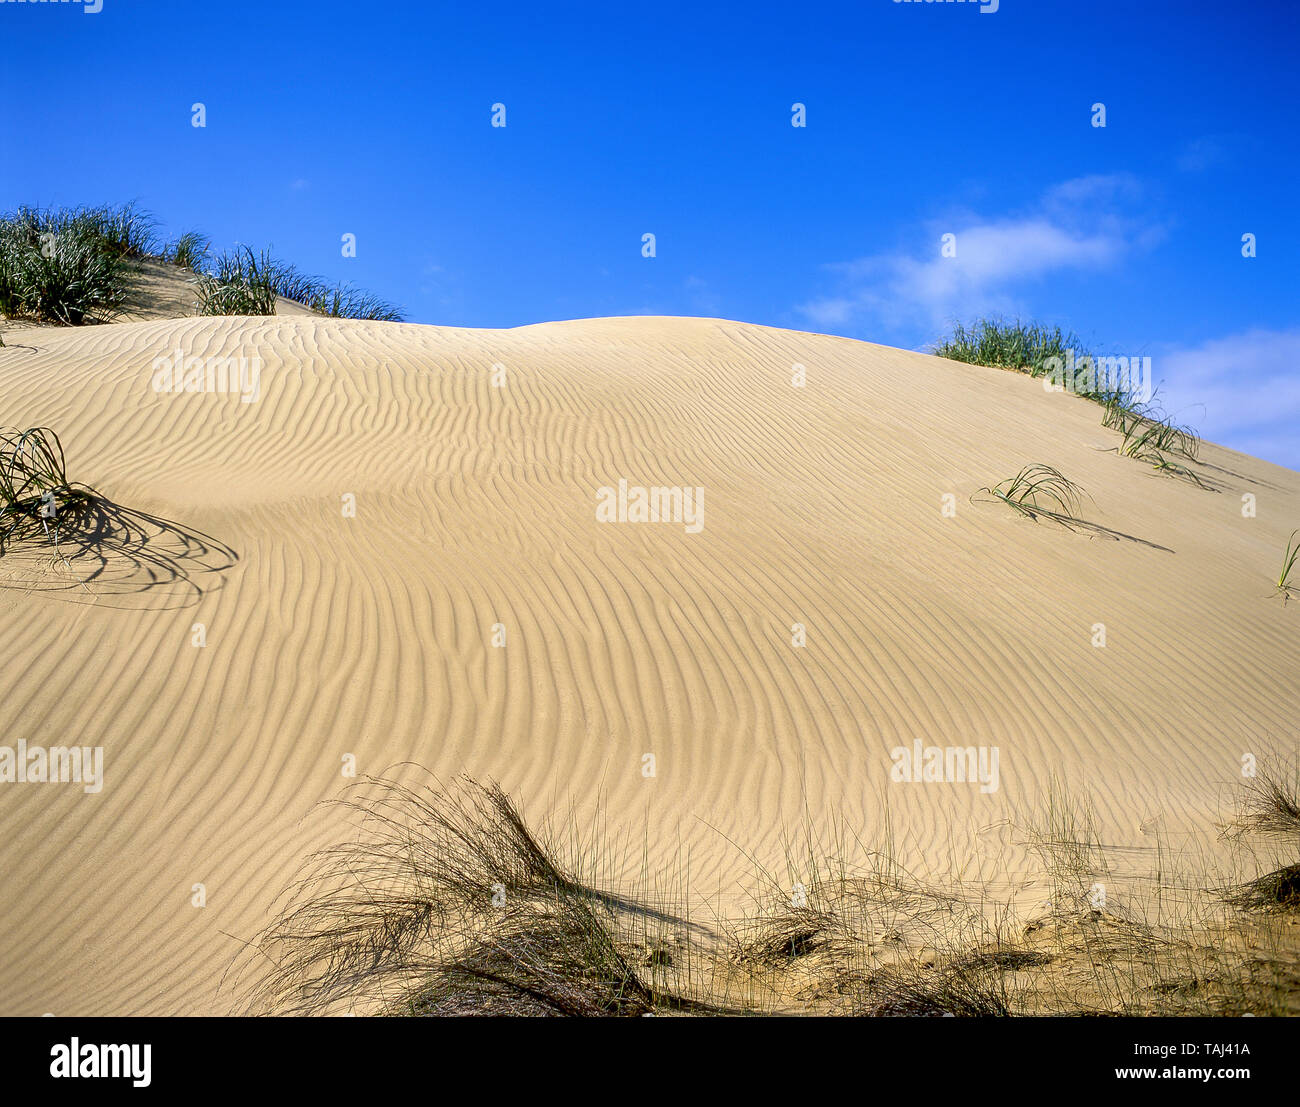 Page 3 - Te High Resolution Stock Photography and Images - Alamy